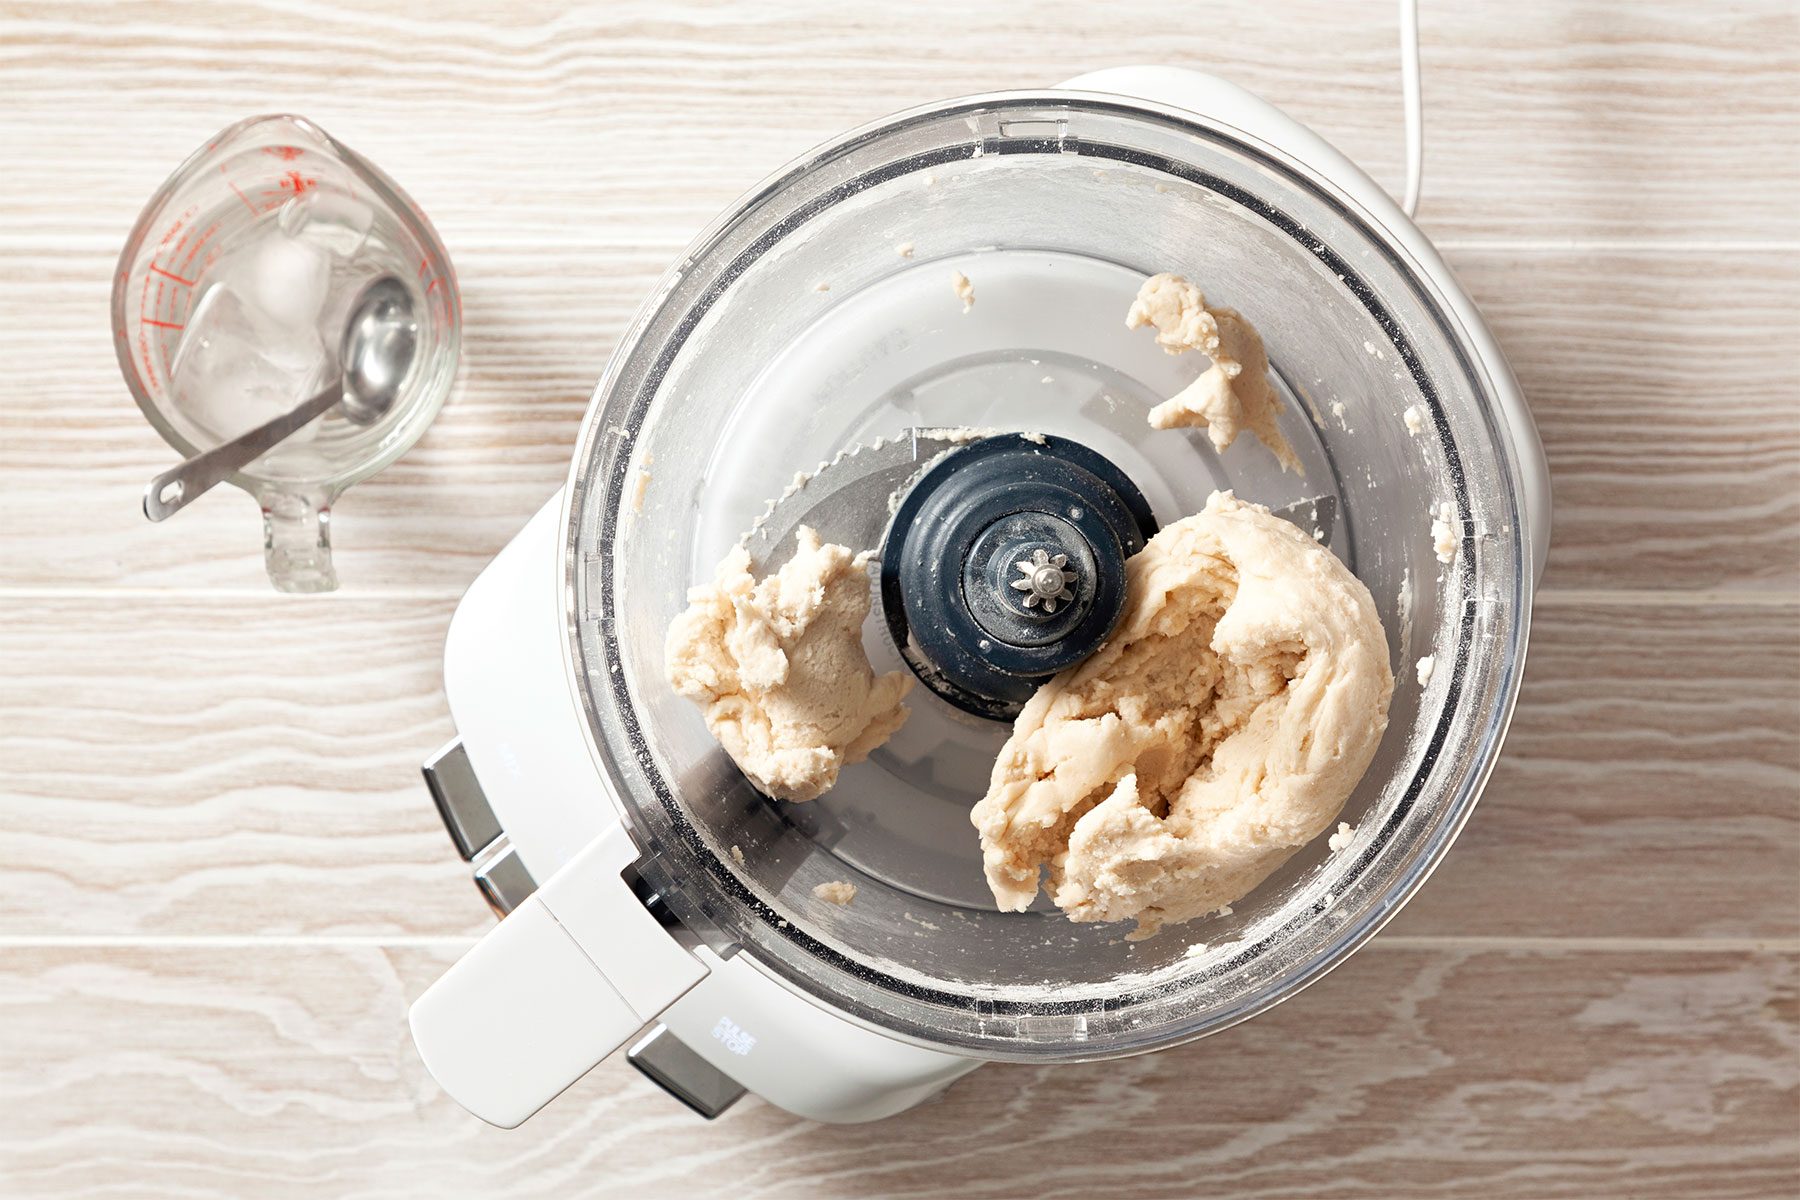 overhead shot; wooden background; In a food processor, mixing flour to form dough; ice water in a beaker with small spoon;